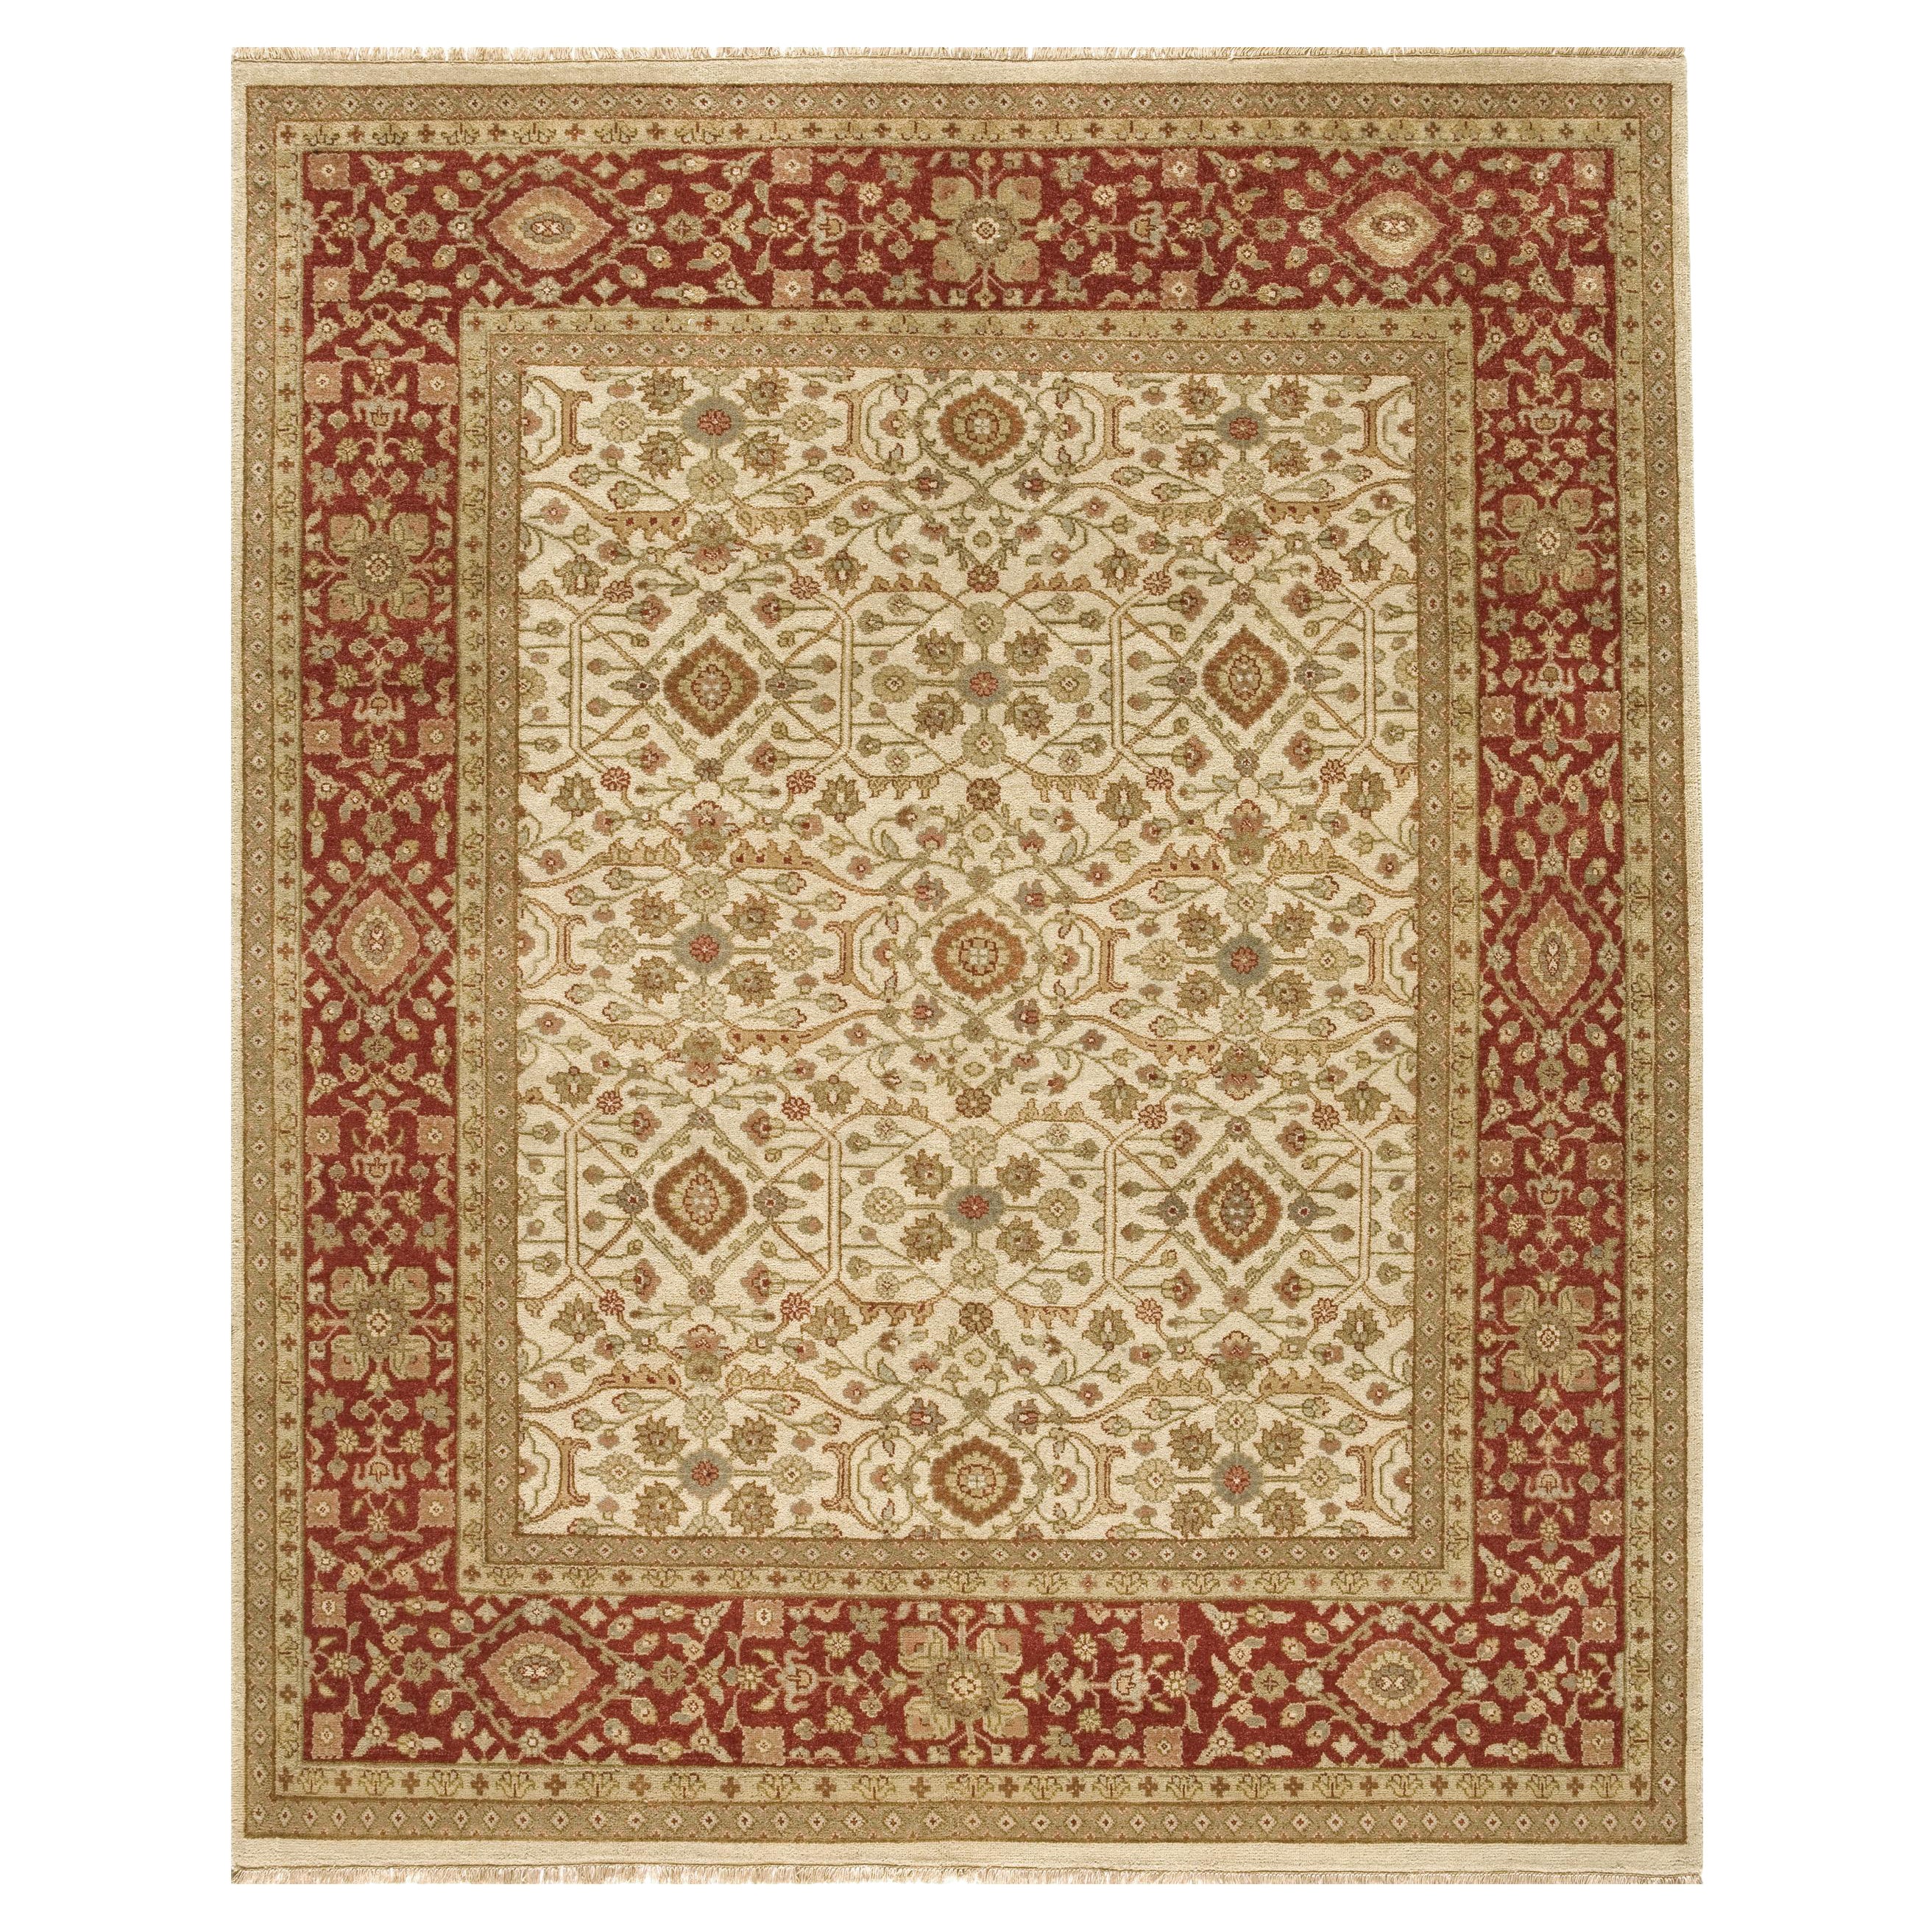 Luxury Traditional Hand-Knotted Ziegler Ivory & Brick 12x22 Rug